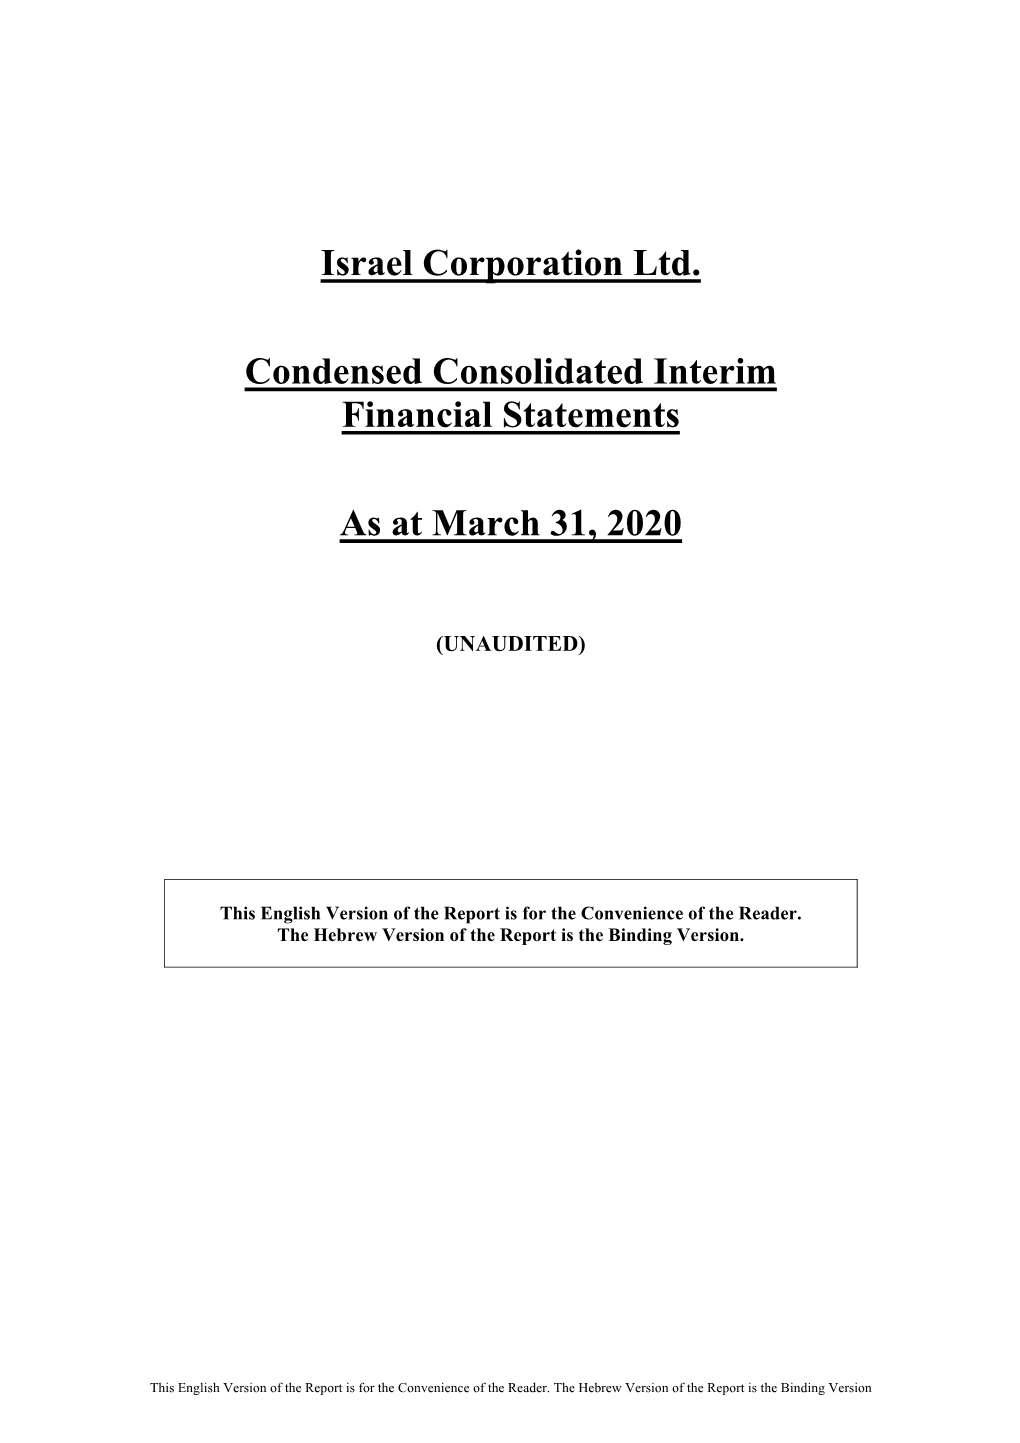 Israel Corporation Ltd. Condensed Consolidated Interim Financial Statements at March 31, 2020 Unaudited